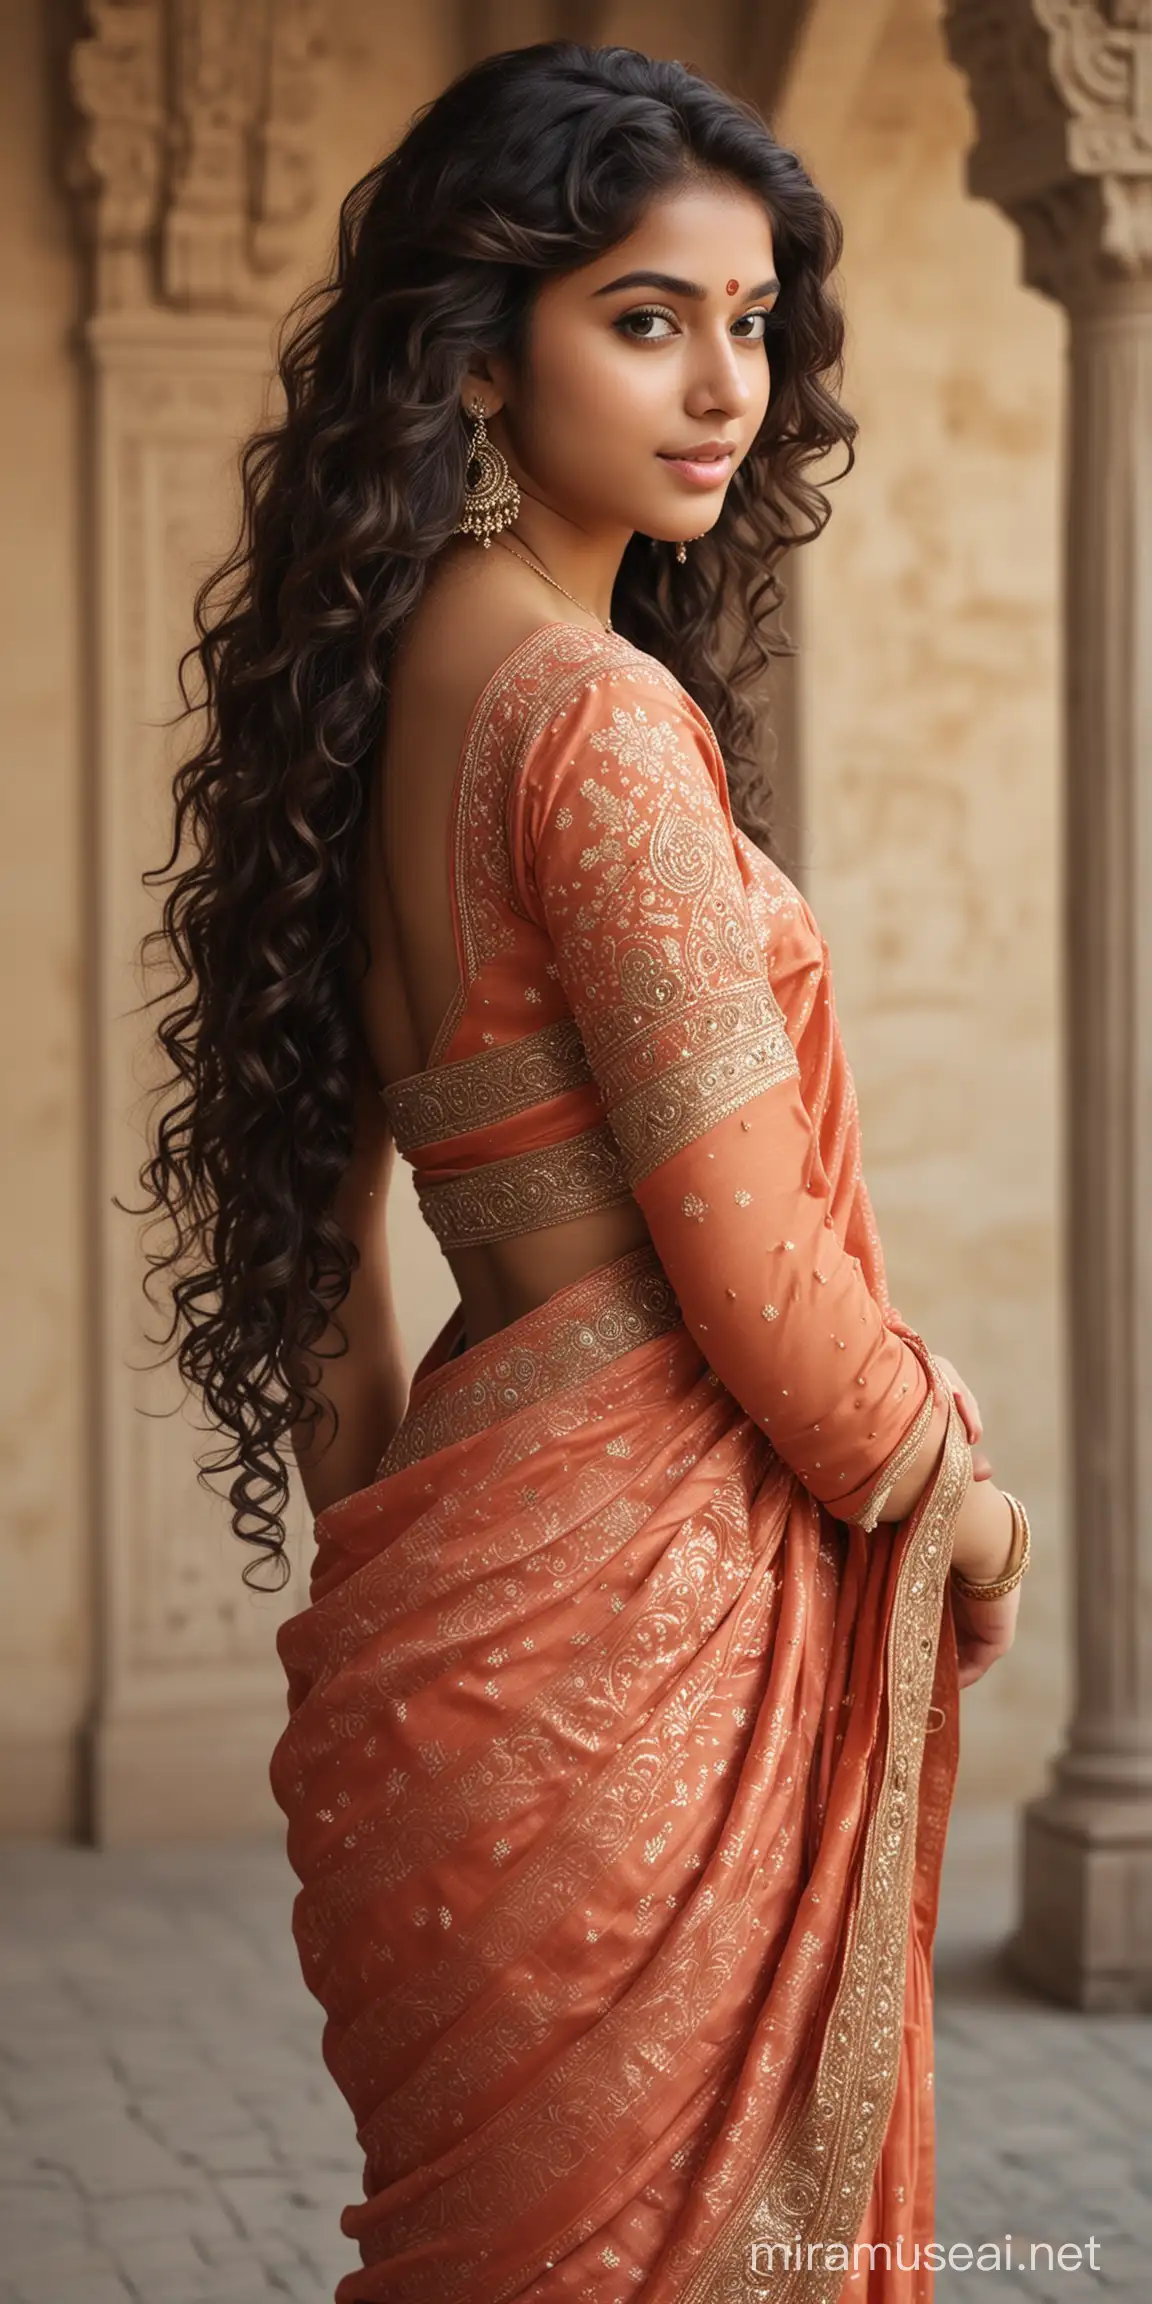 full body photo of most beautiful european girl as 16 year old cute beautiful indian girl, tuned away, low cut back, thick long curly hair , elegant saree look, arrogant ly looking back, intricate details, photo realistic, 4k.